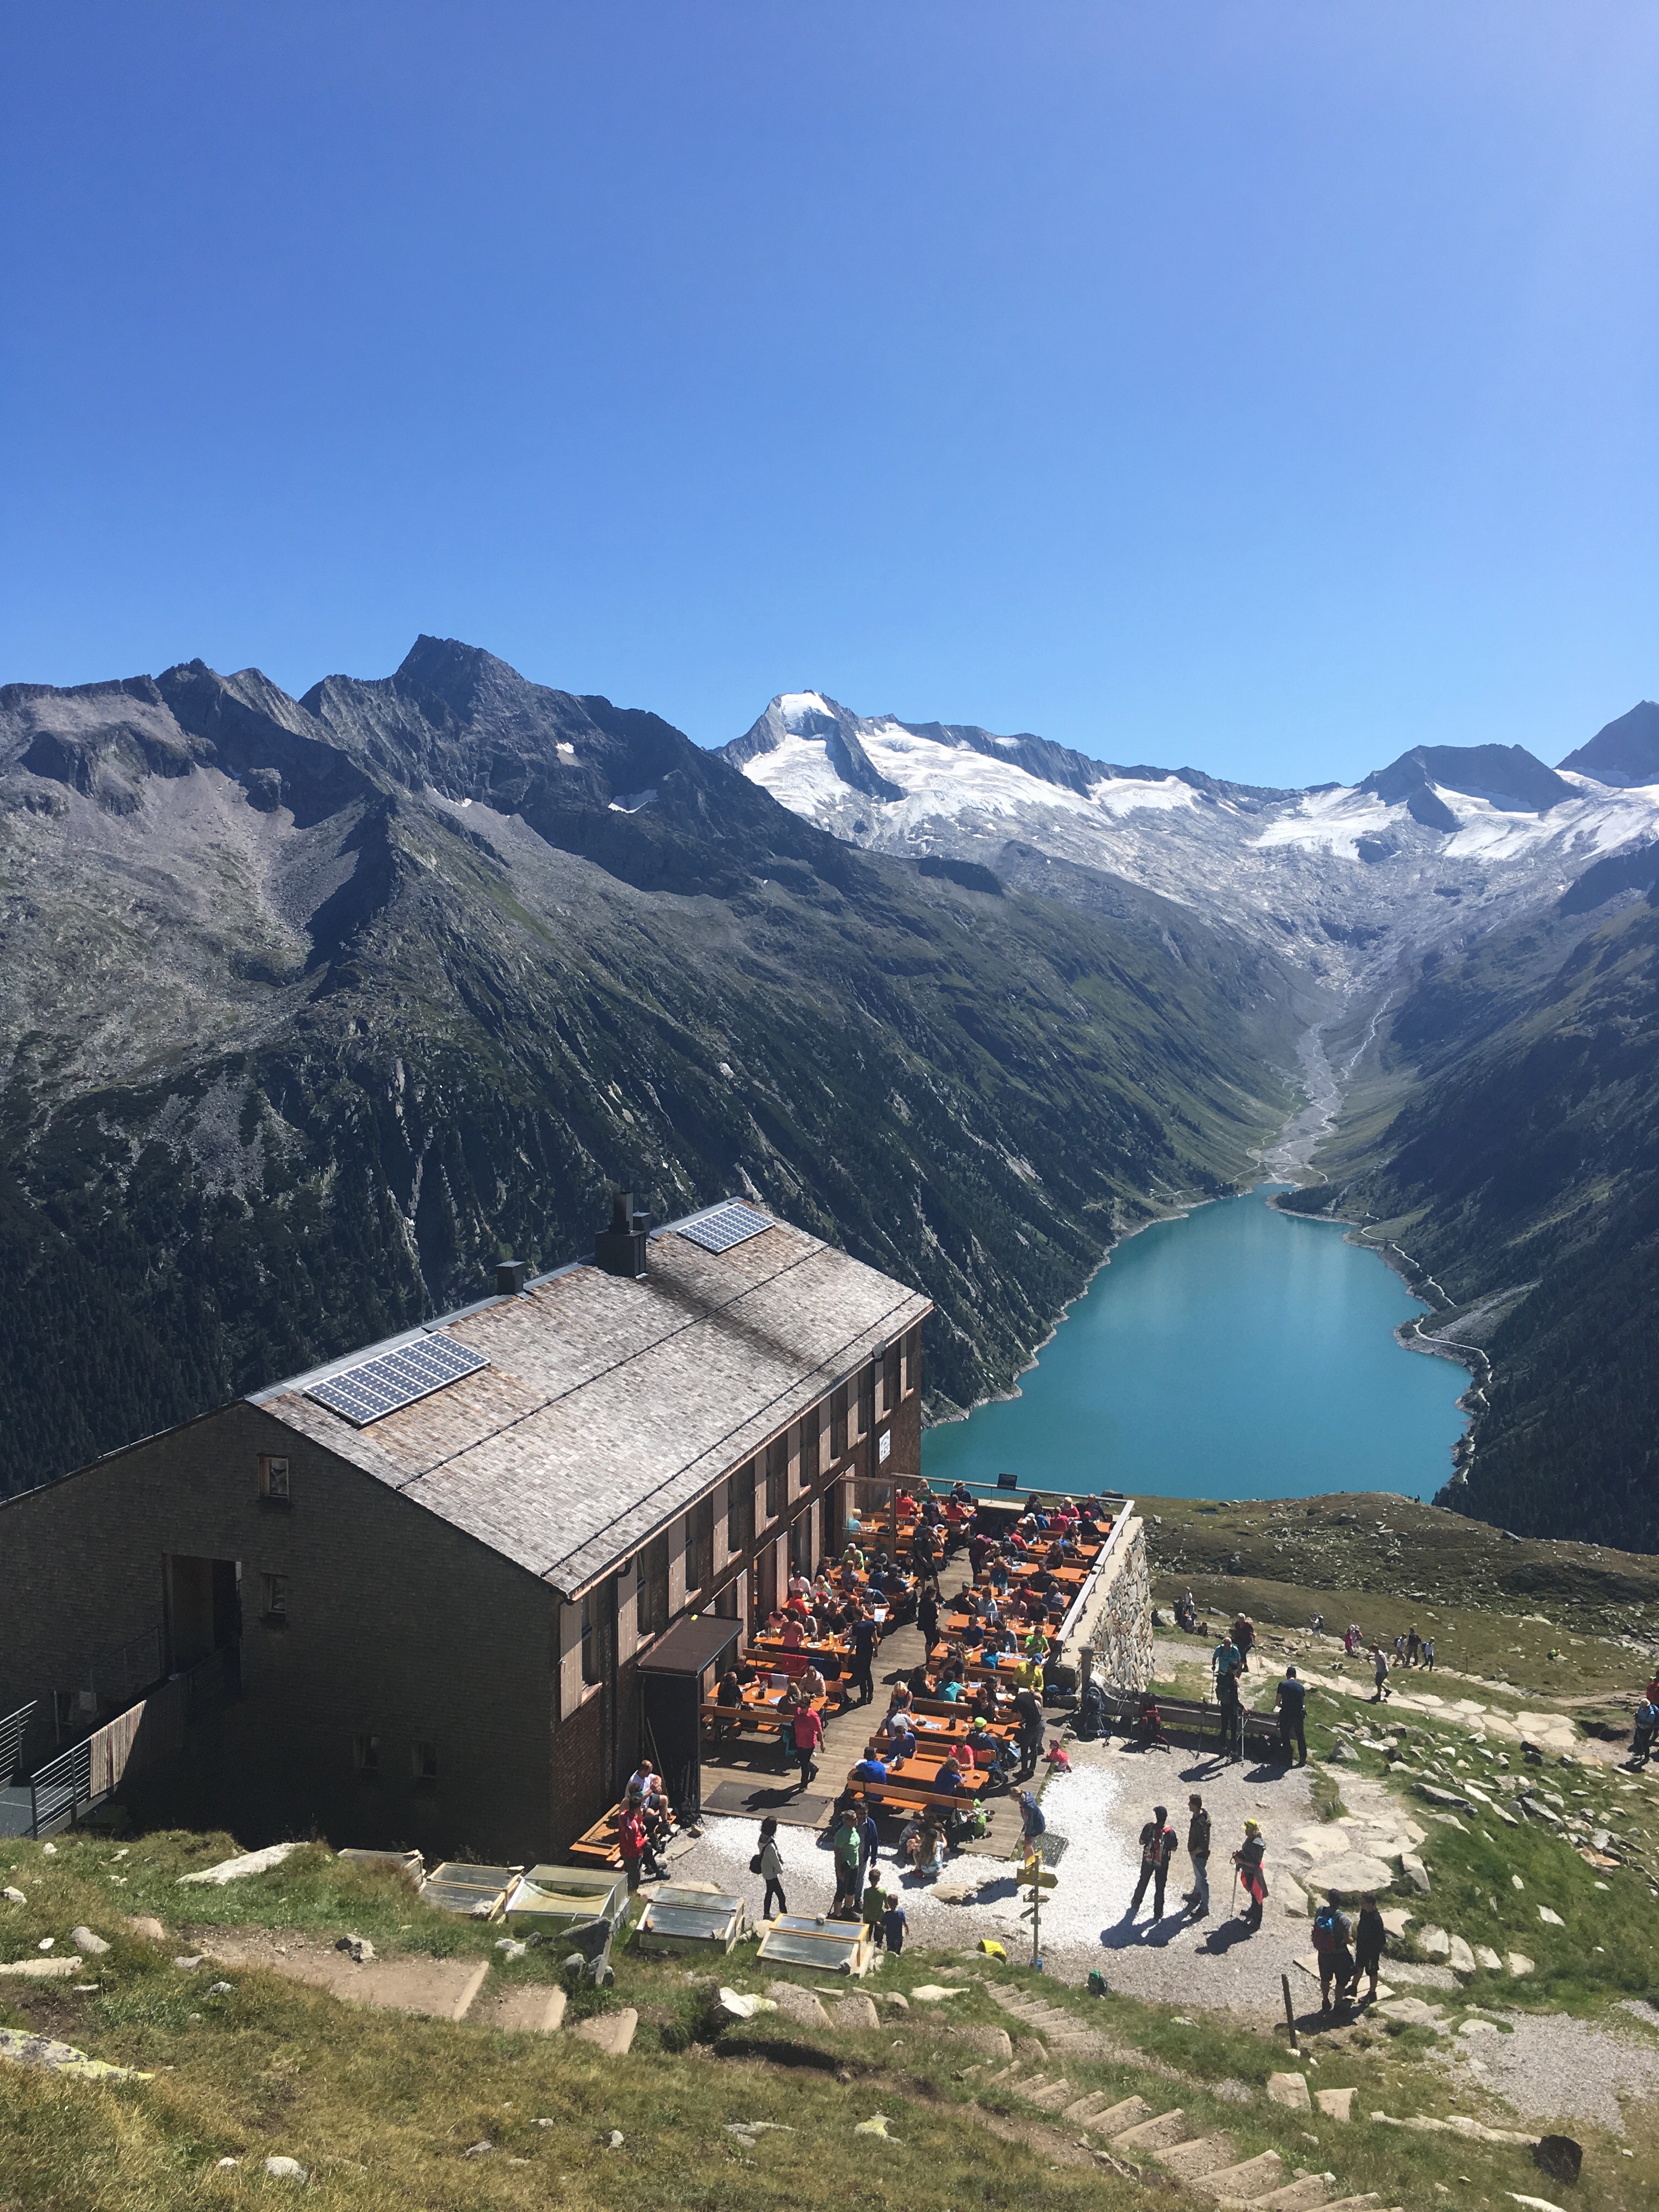 The Olpererhütte terrace got very busy at lunchtime